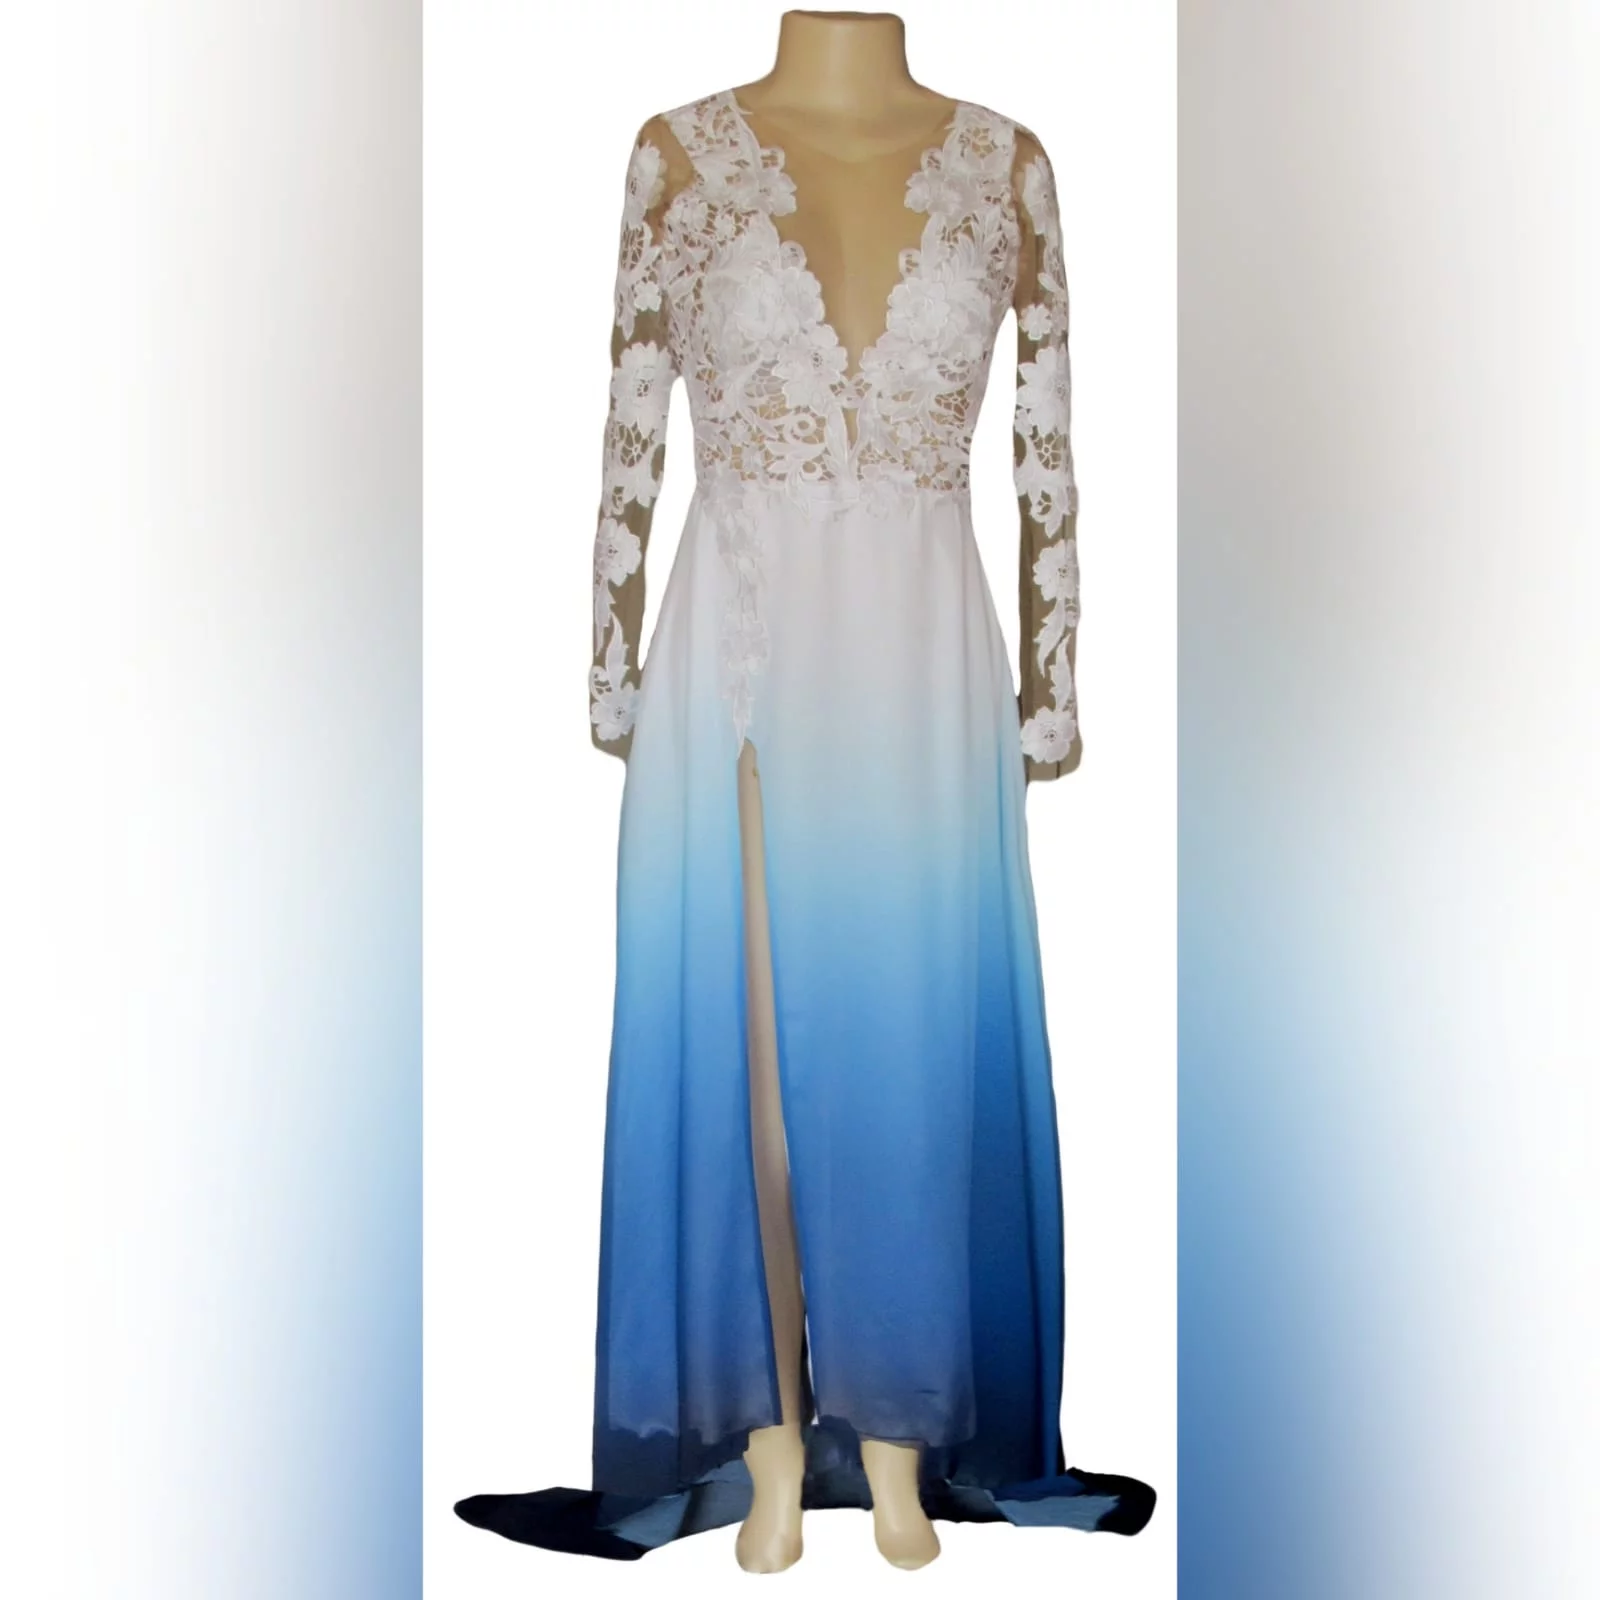 Gorgeous blue and white ombre flowy ceremony dress 4 a gorgeous blue and white ombre flowy ceremony dress created for a matric dance night. With a classy white bodice with elegant illusion lace sleeves. With a slit and a train